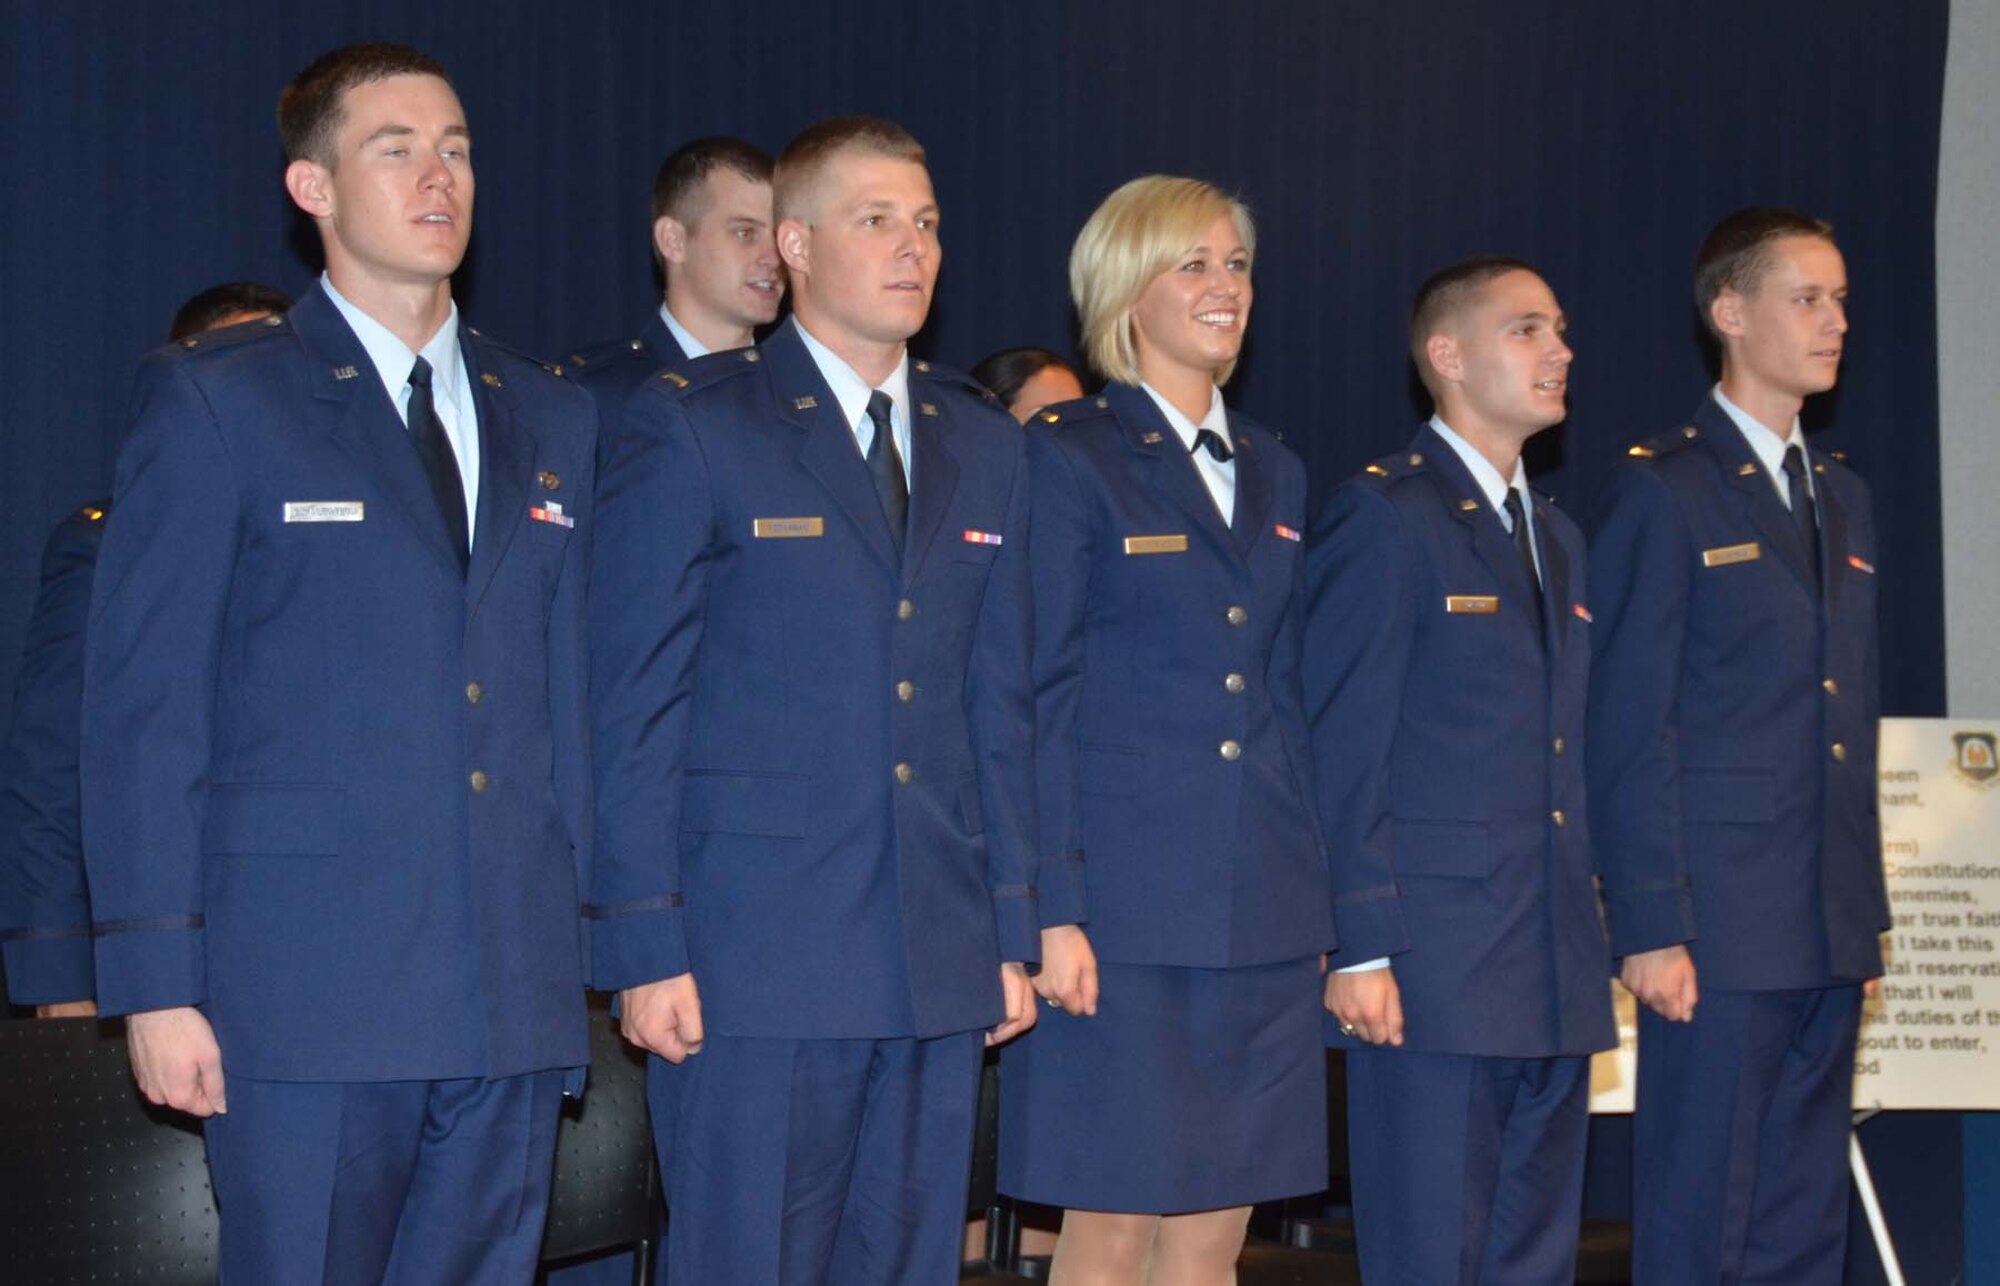 University of New Mexico Air Force ROTC cadets took their oath of commission in a ceremony May 11 at the Air Force Operational Test and Evaluation Center headquarters at Kirtland Air Force Base, N.M.